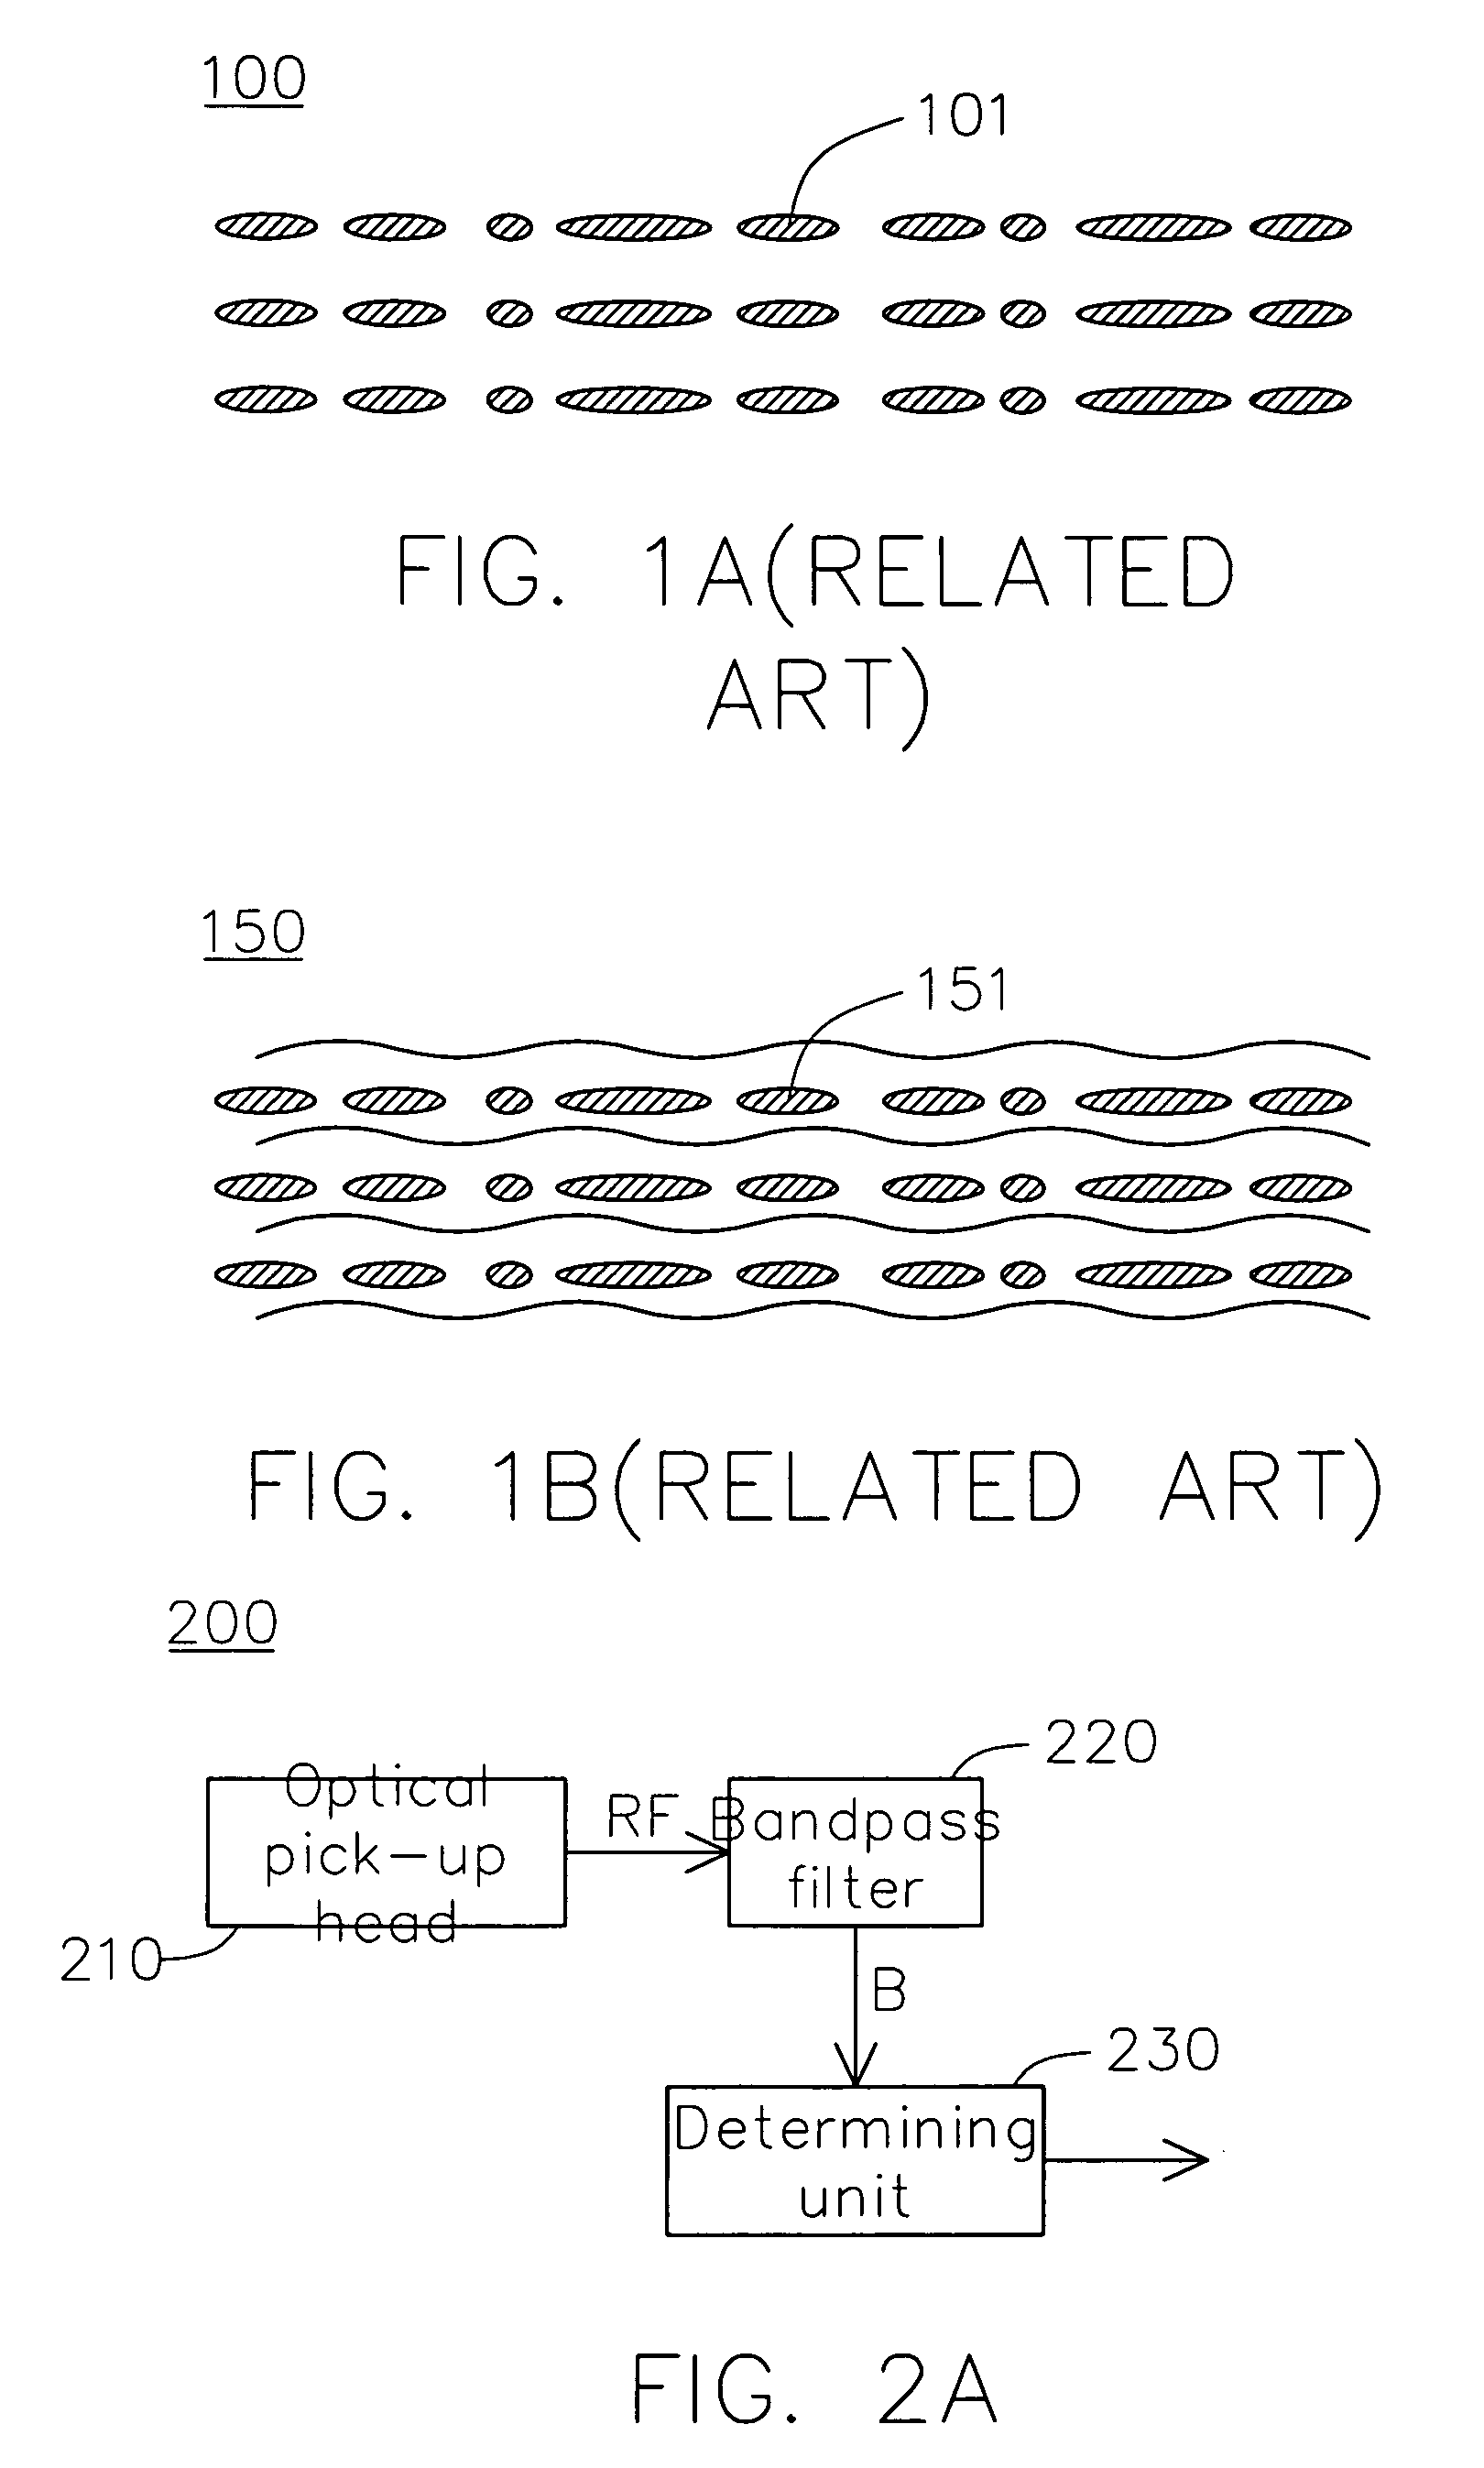 Apparatus and method for determining type of an optical disk